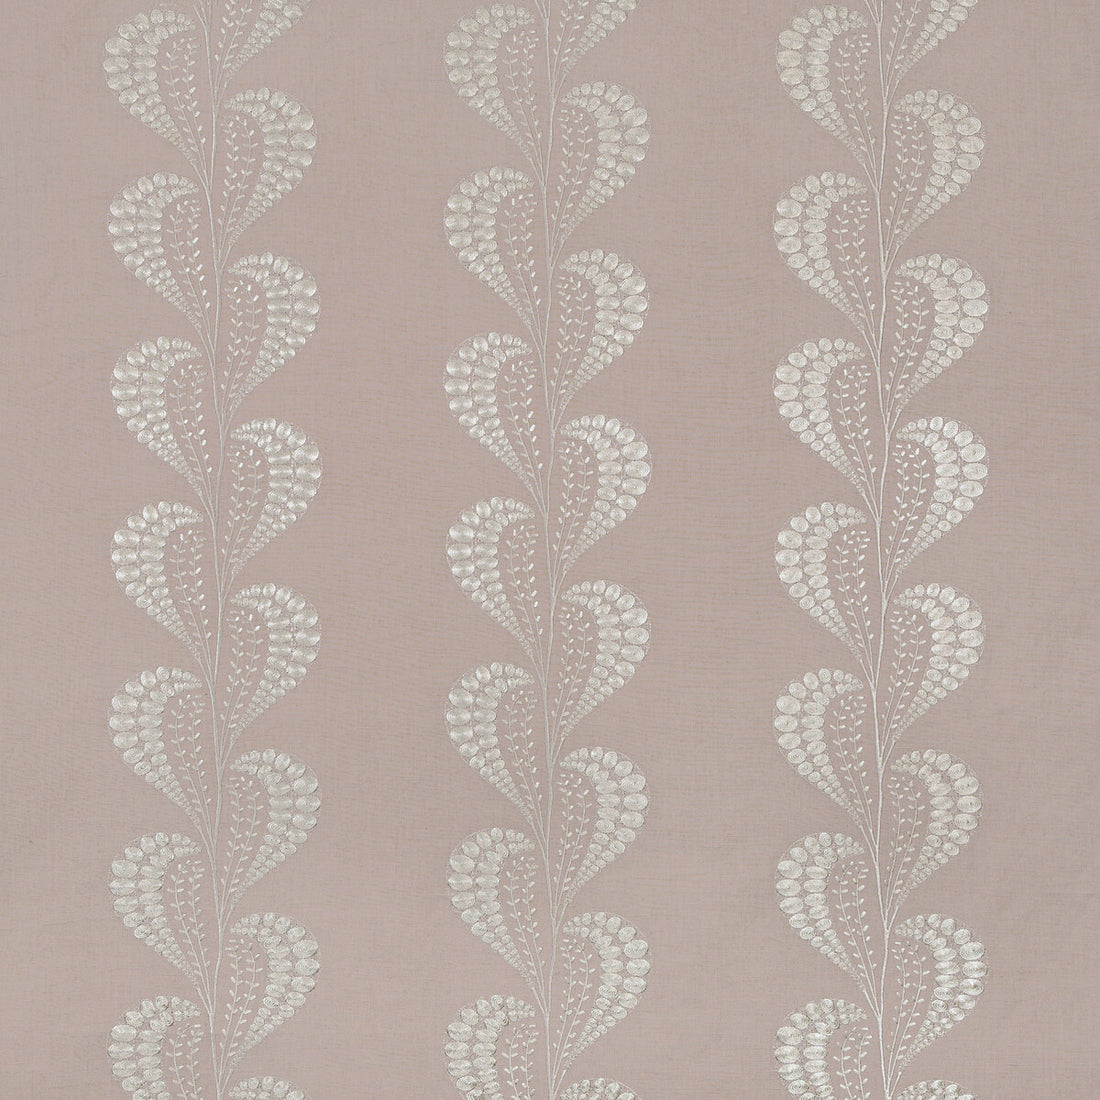 Tisza fabric in pinkberry color - pattern 4787.17.0 - by Kravet Couture in the Windsor Smith Naila collection